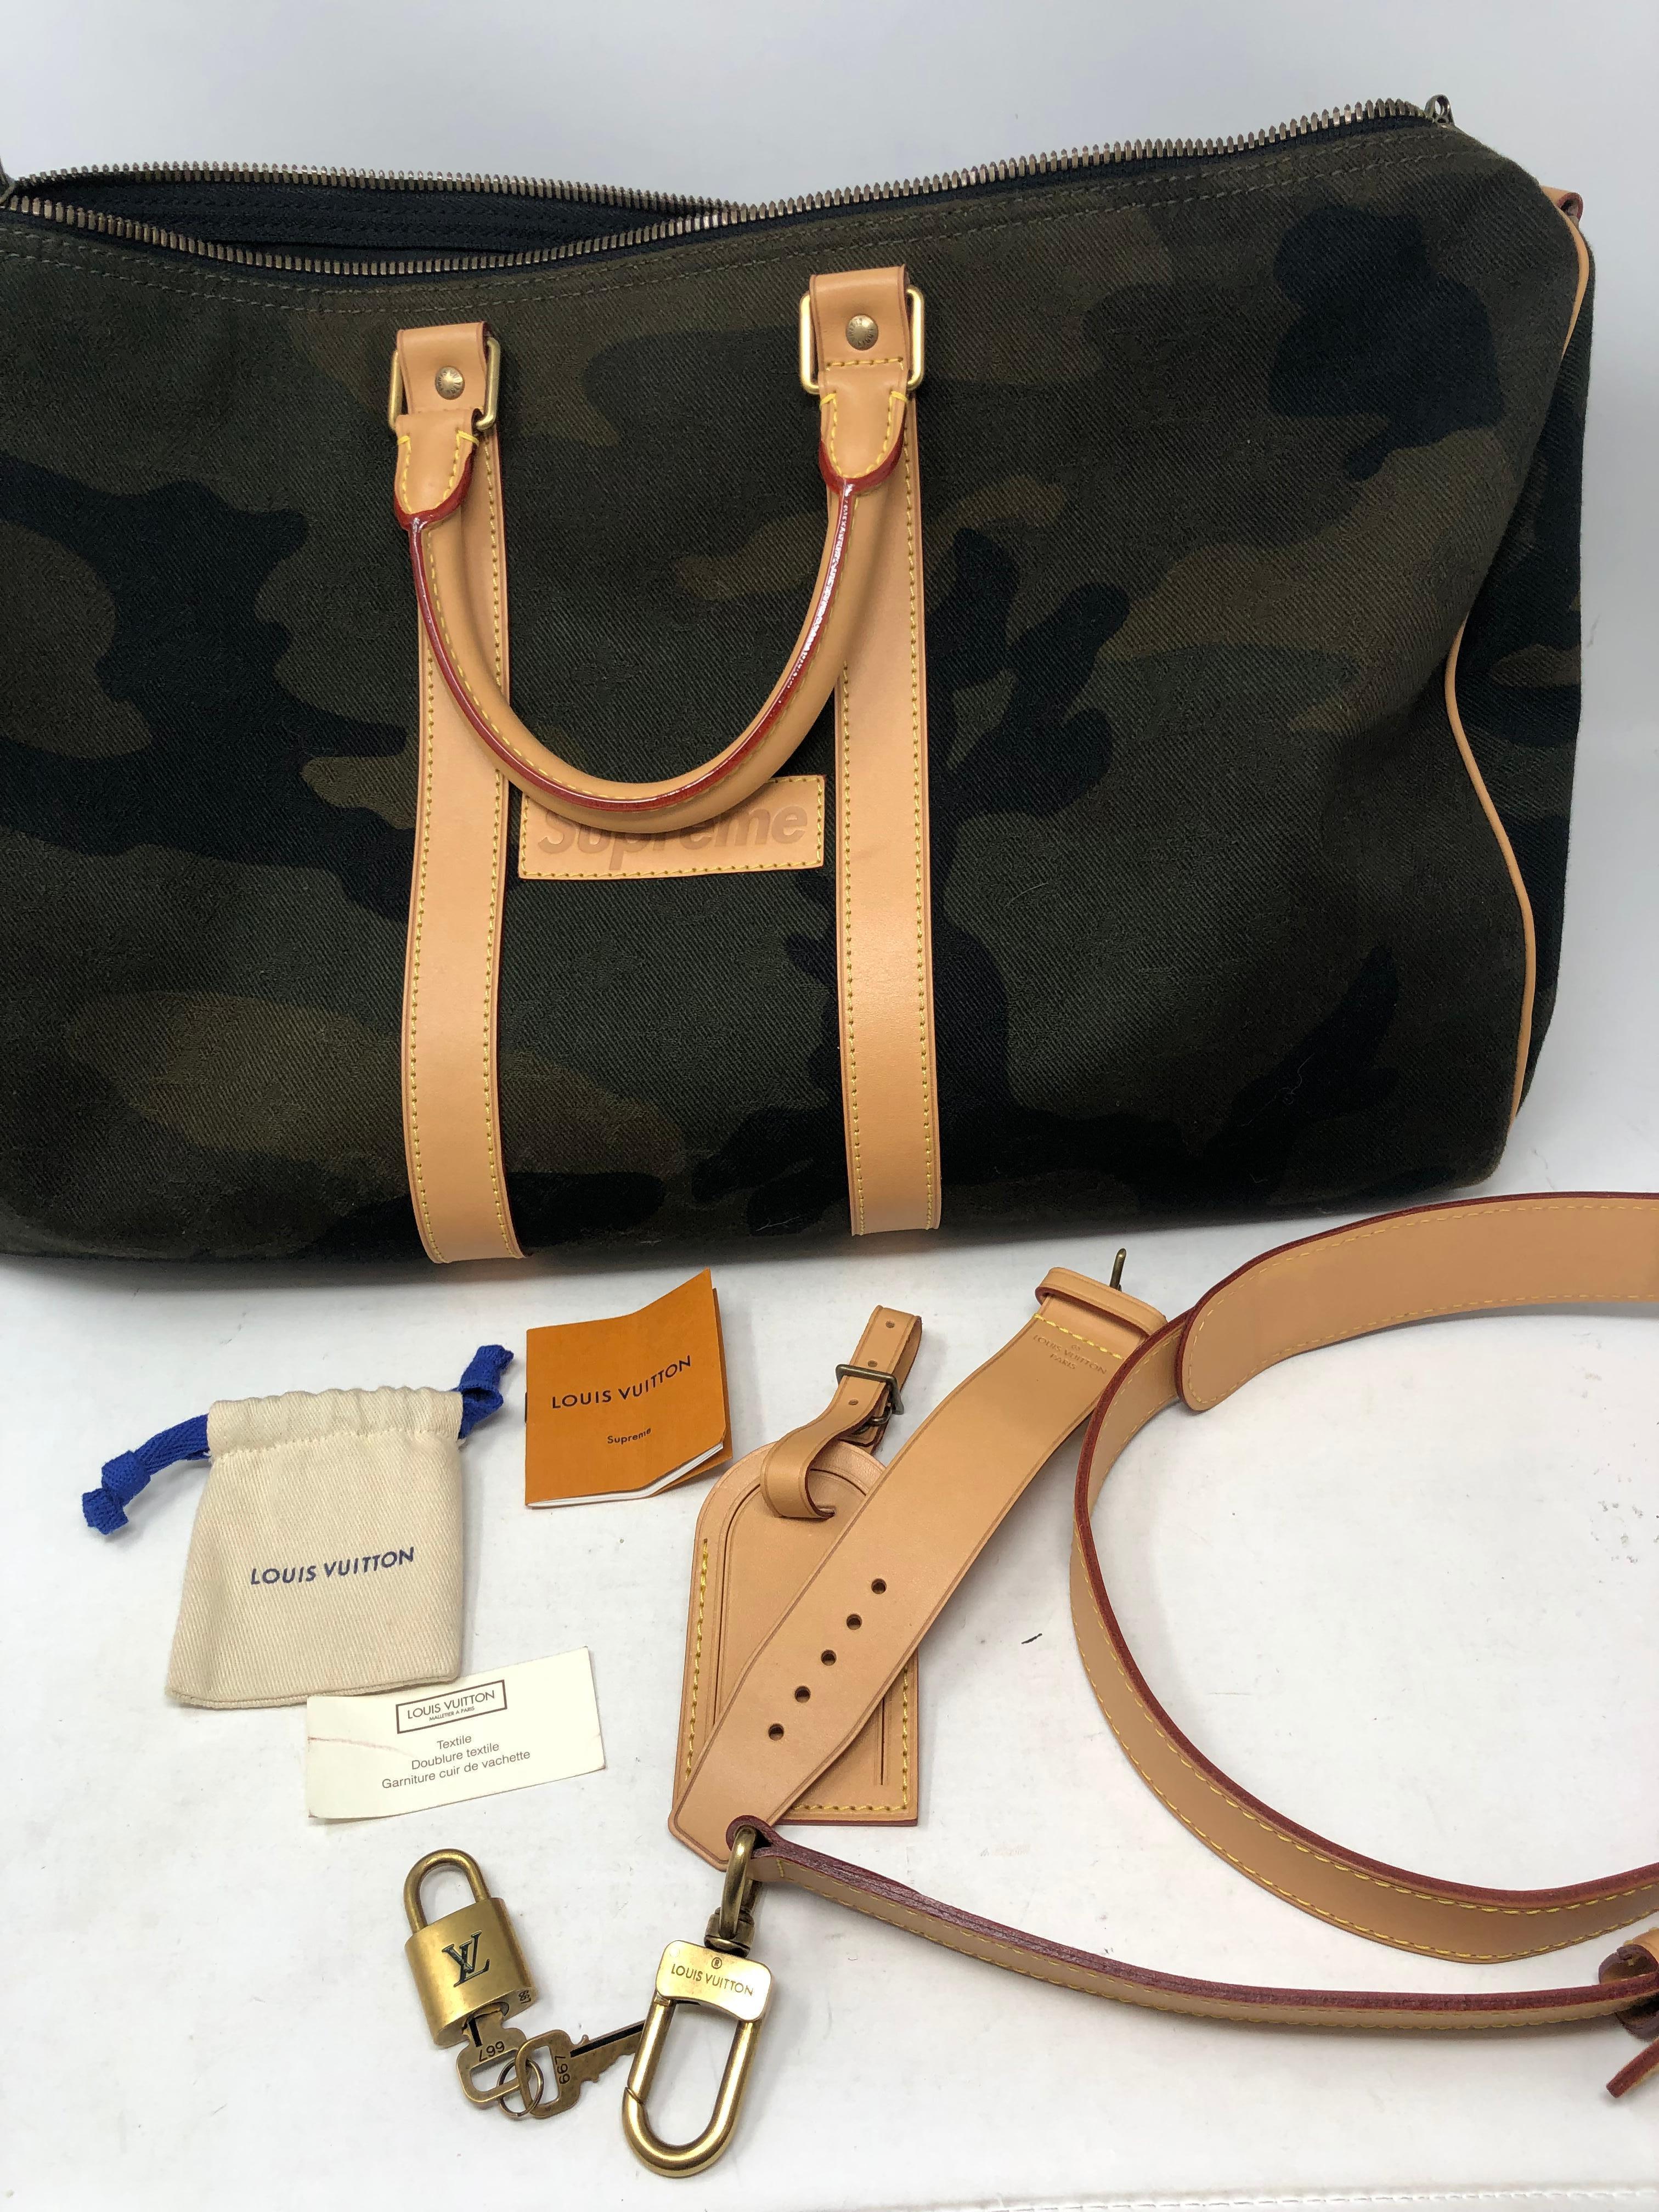 Louis Vuitton Supreme Camouflage Keepall 45. Brand New Condition. Limited Supreme Collection. Includes lock, keys, strap, luggage holder, pamphlet, and dust cover. Guaranteed authentic. 